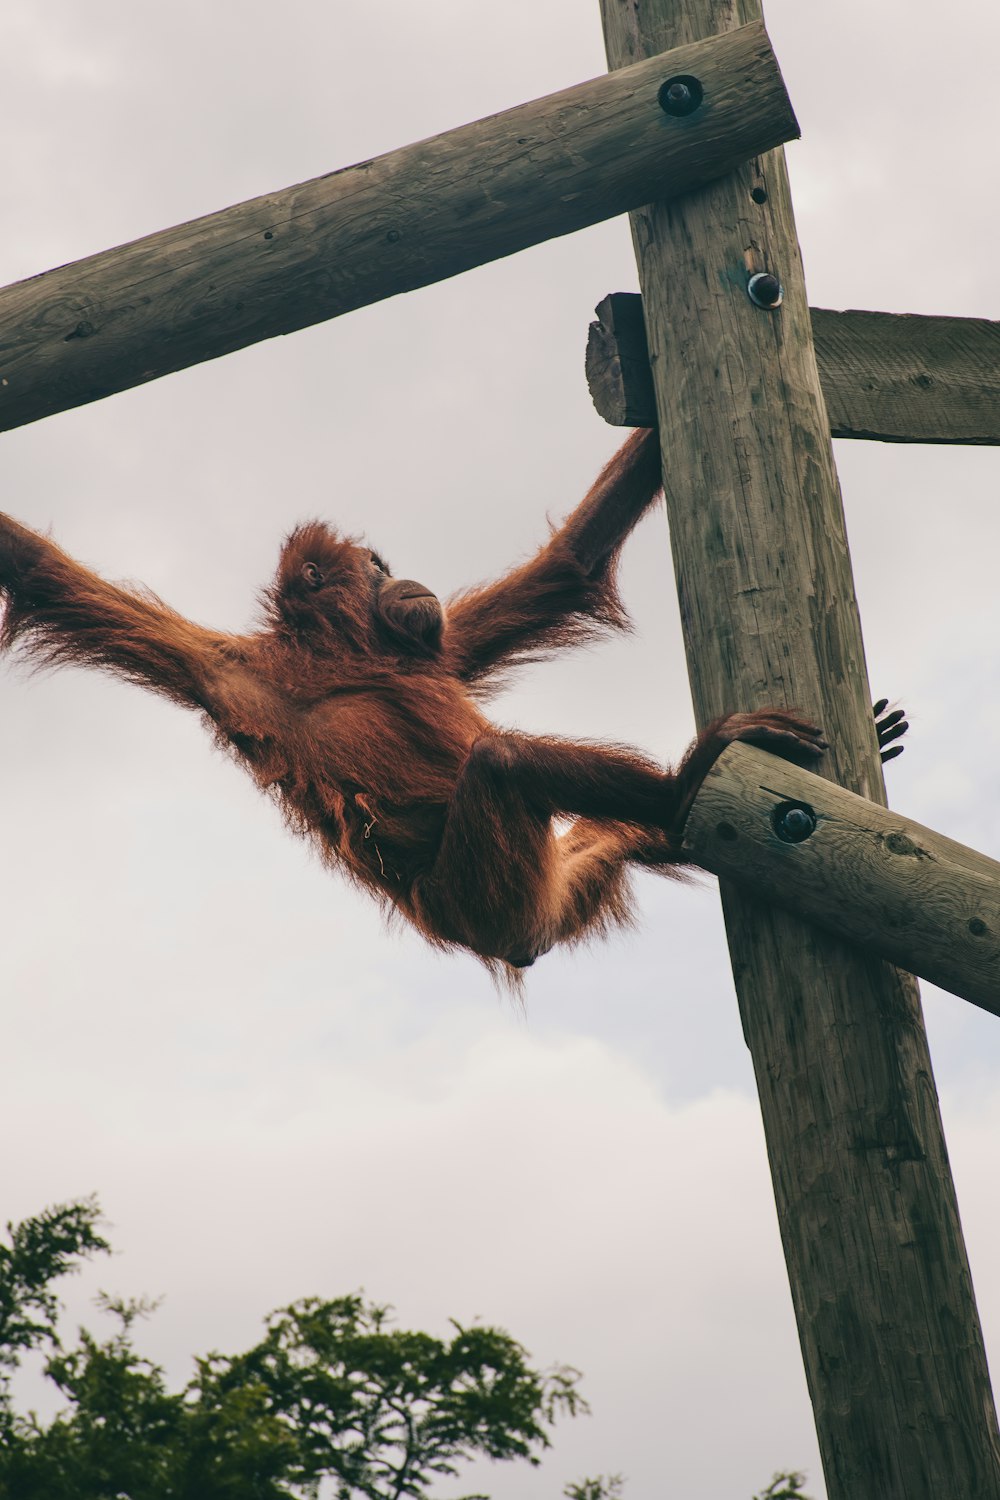 an oranguel hanging upside down on a wooden pole